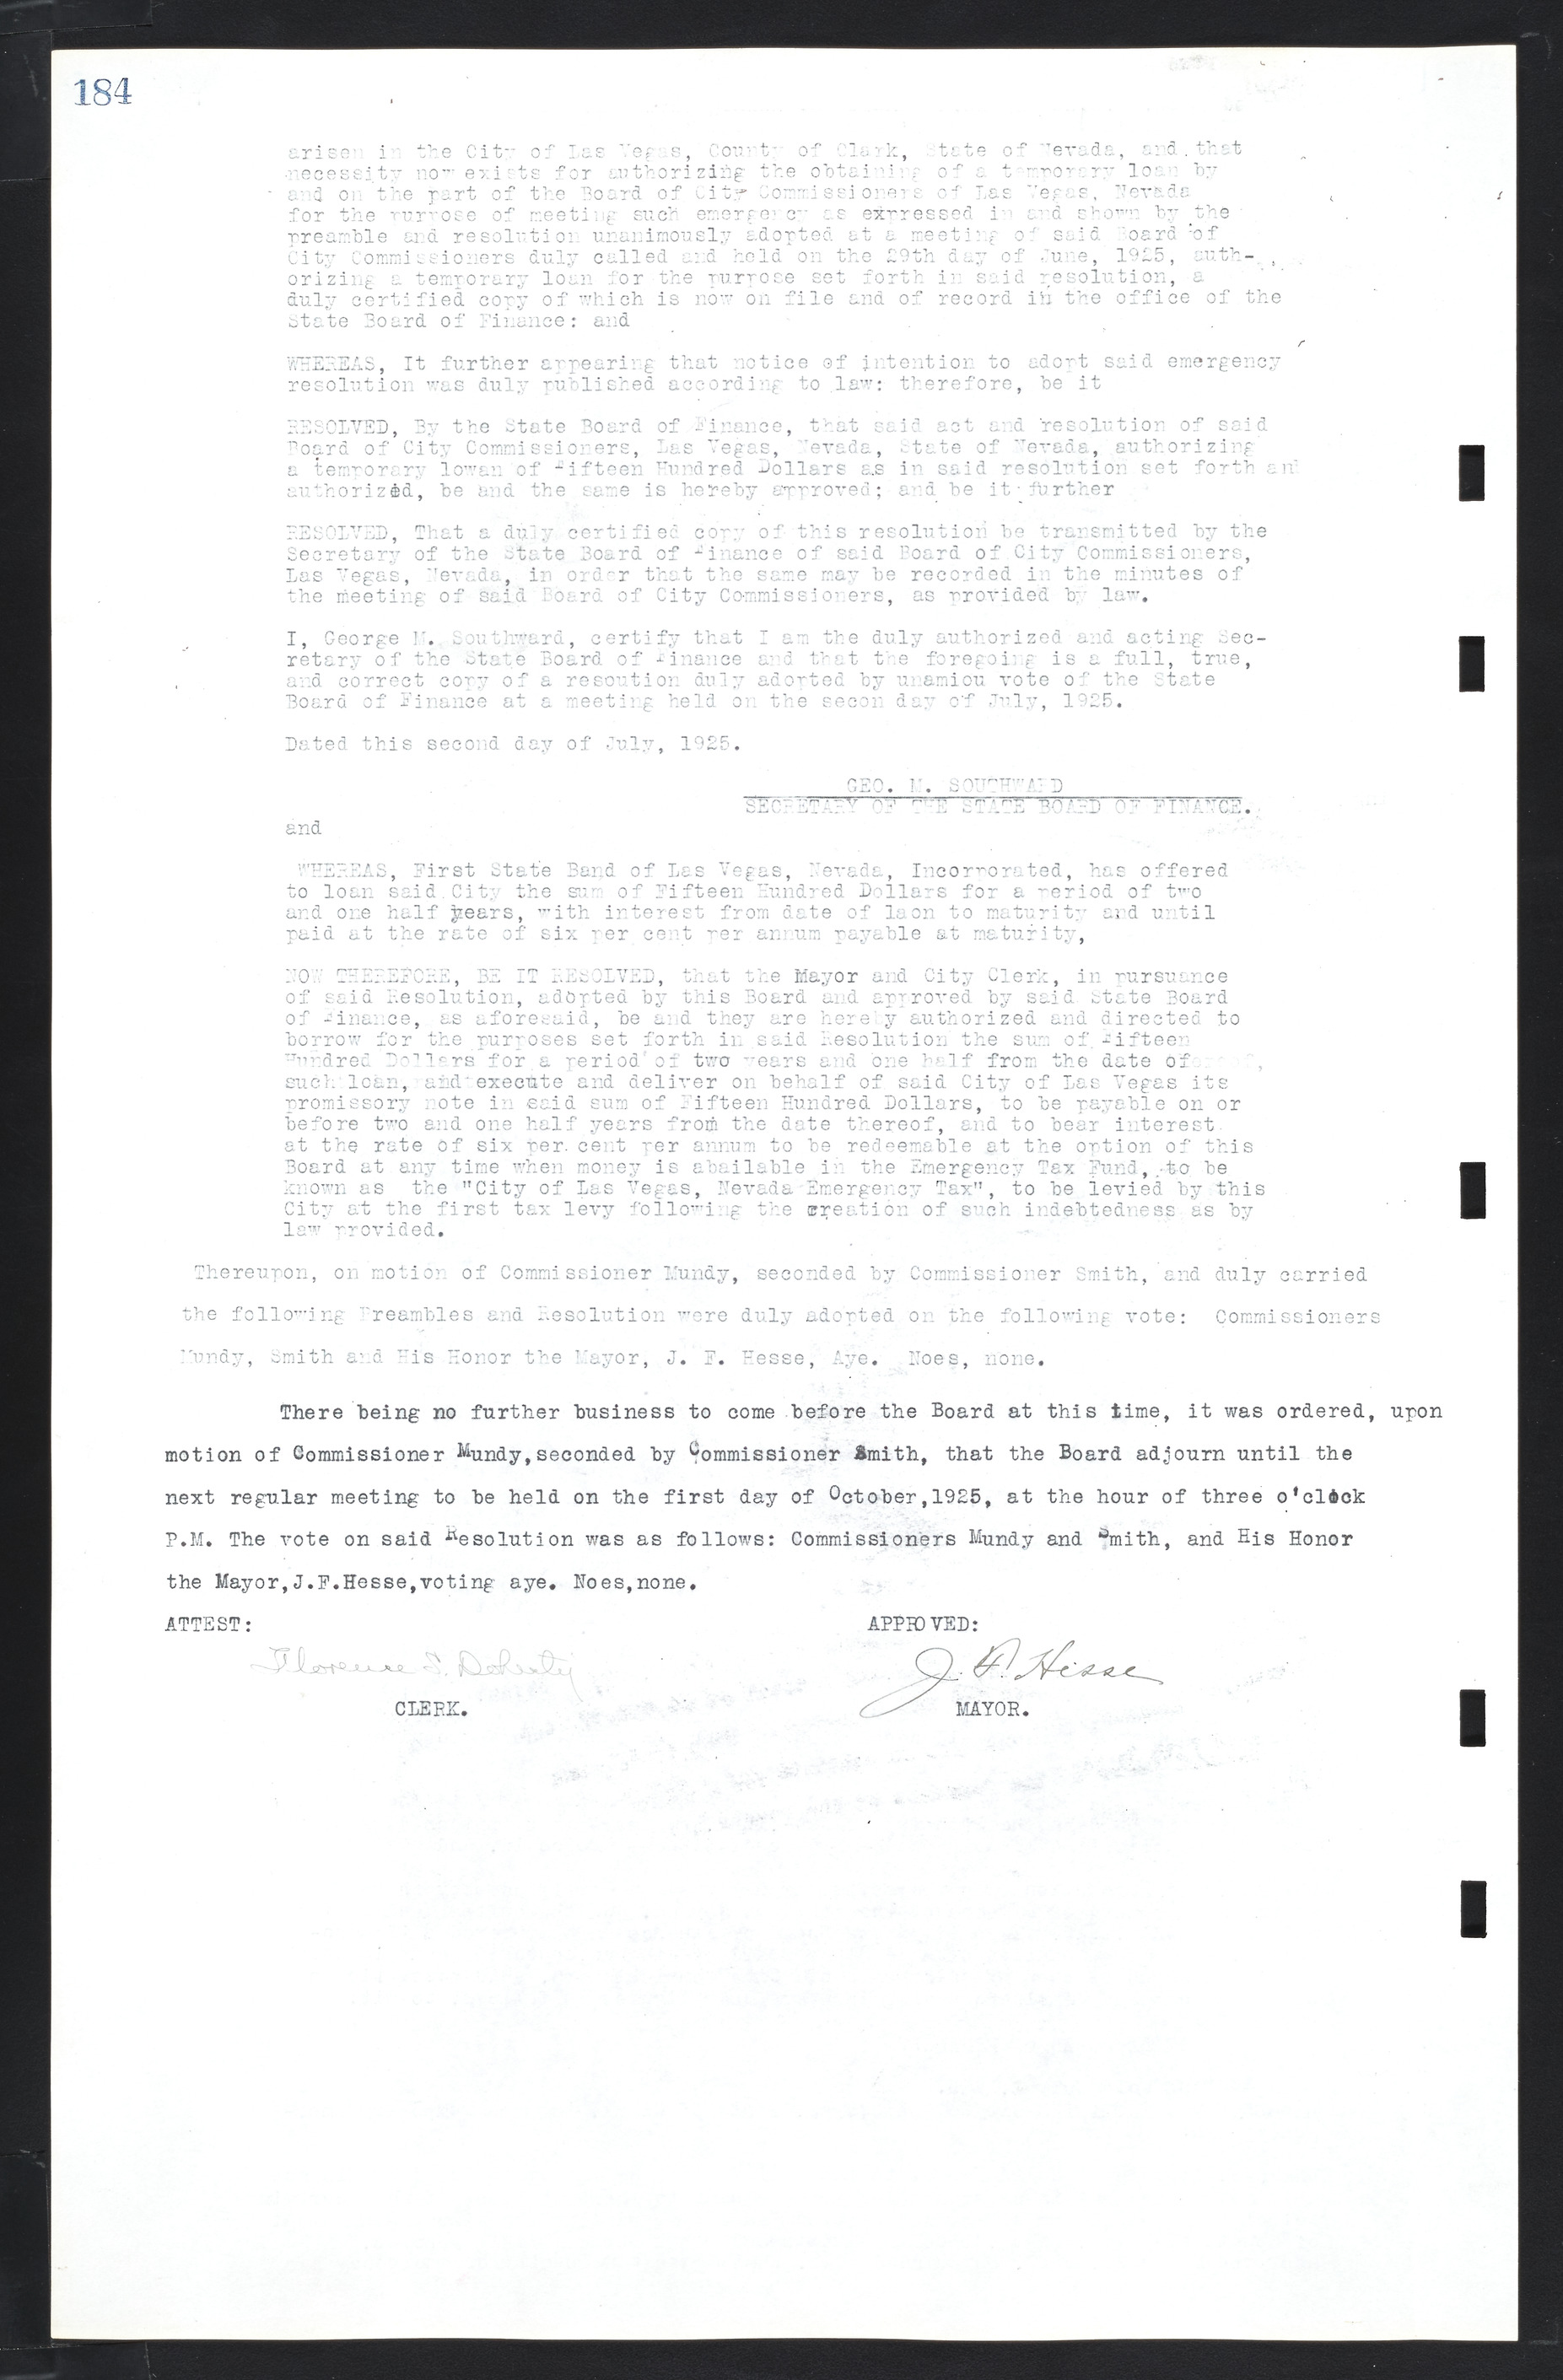 Las Vegas City Commission Minutes, March 1, 1922 to May 10, 1929, lvc000002-191